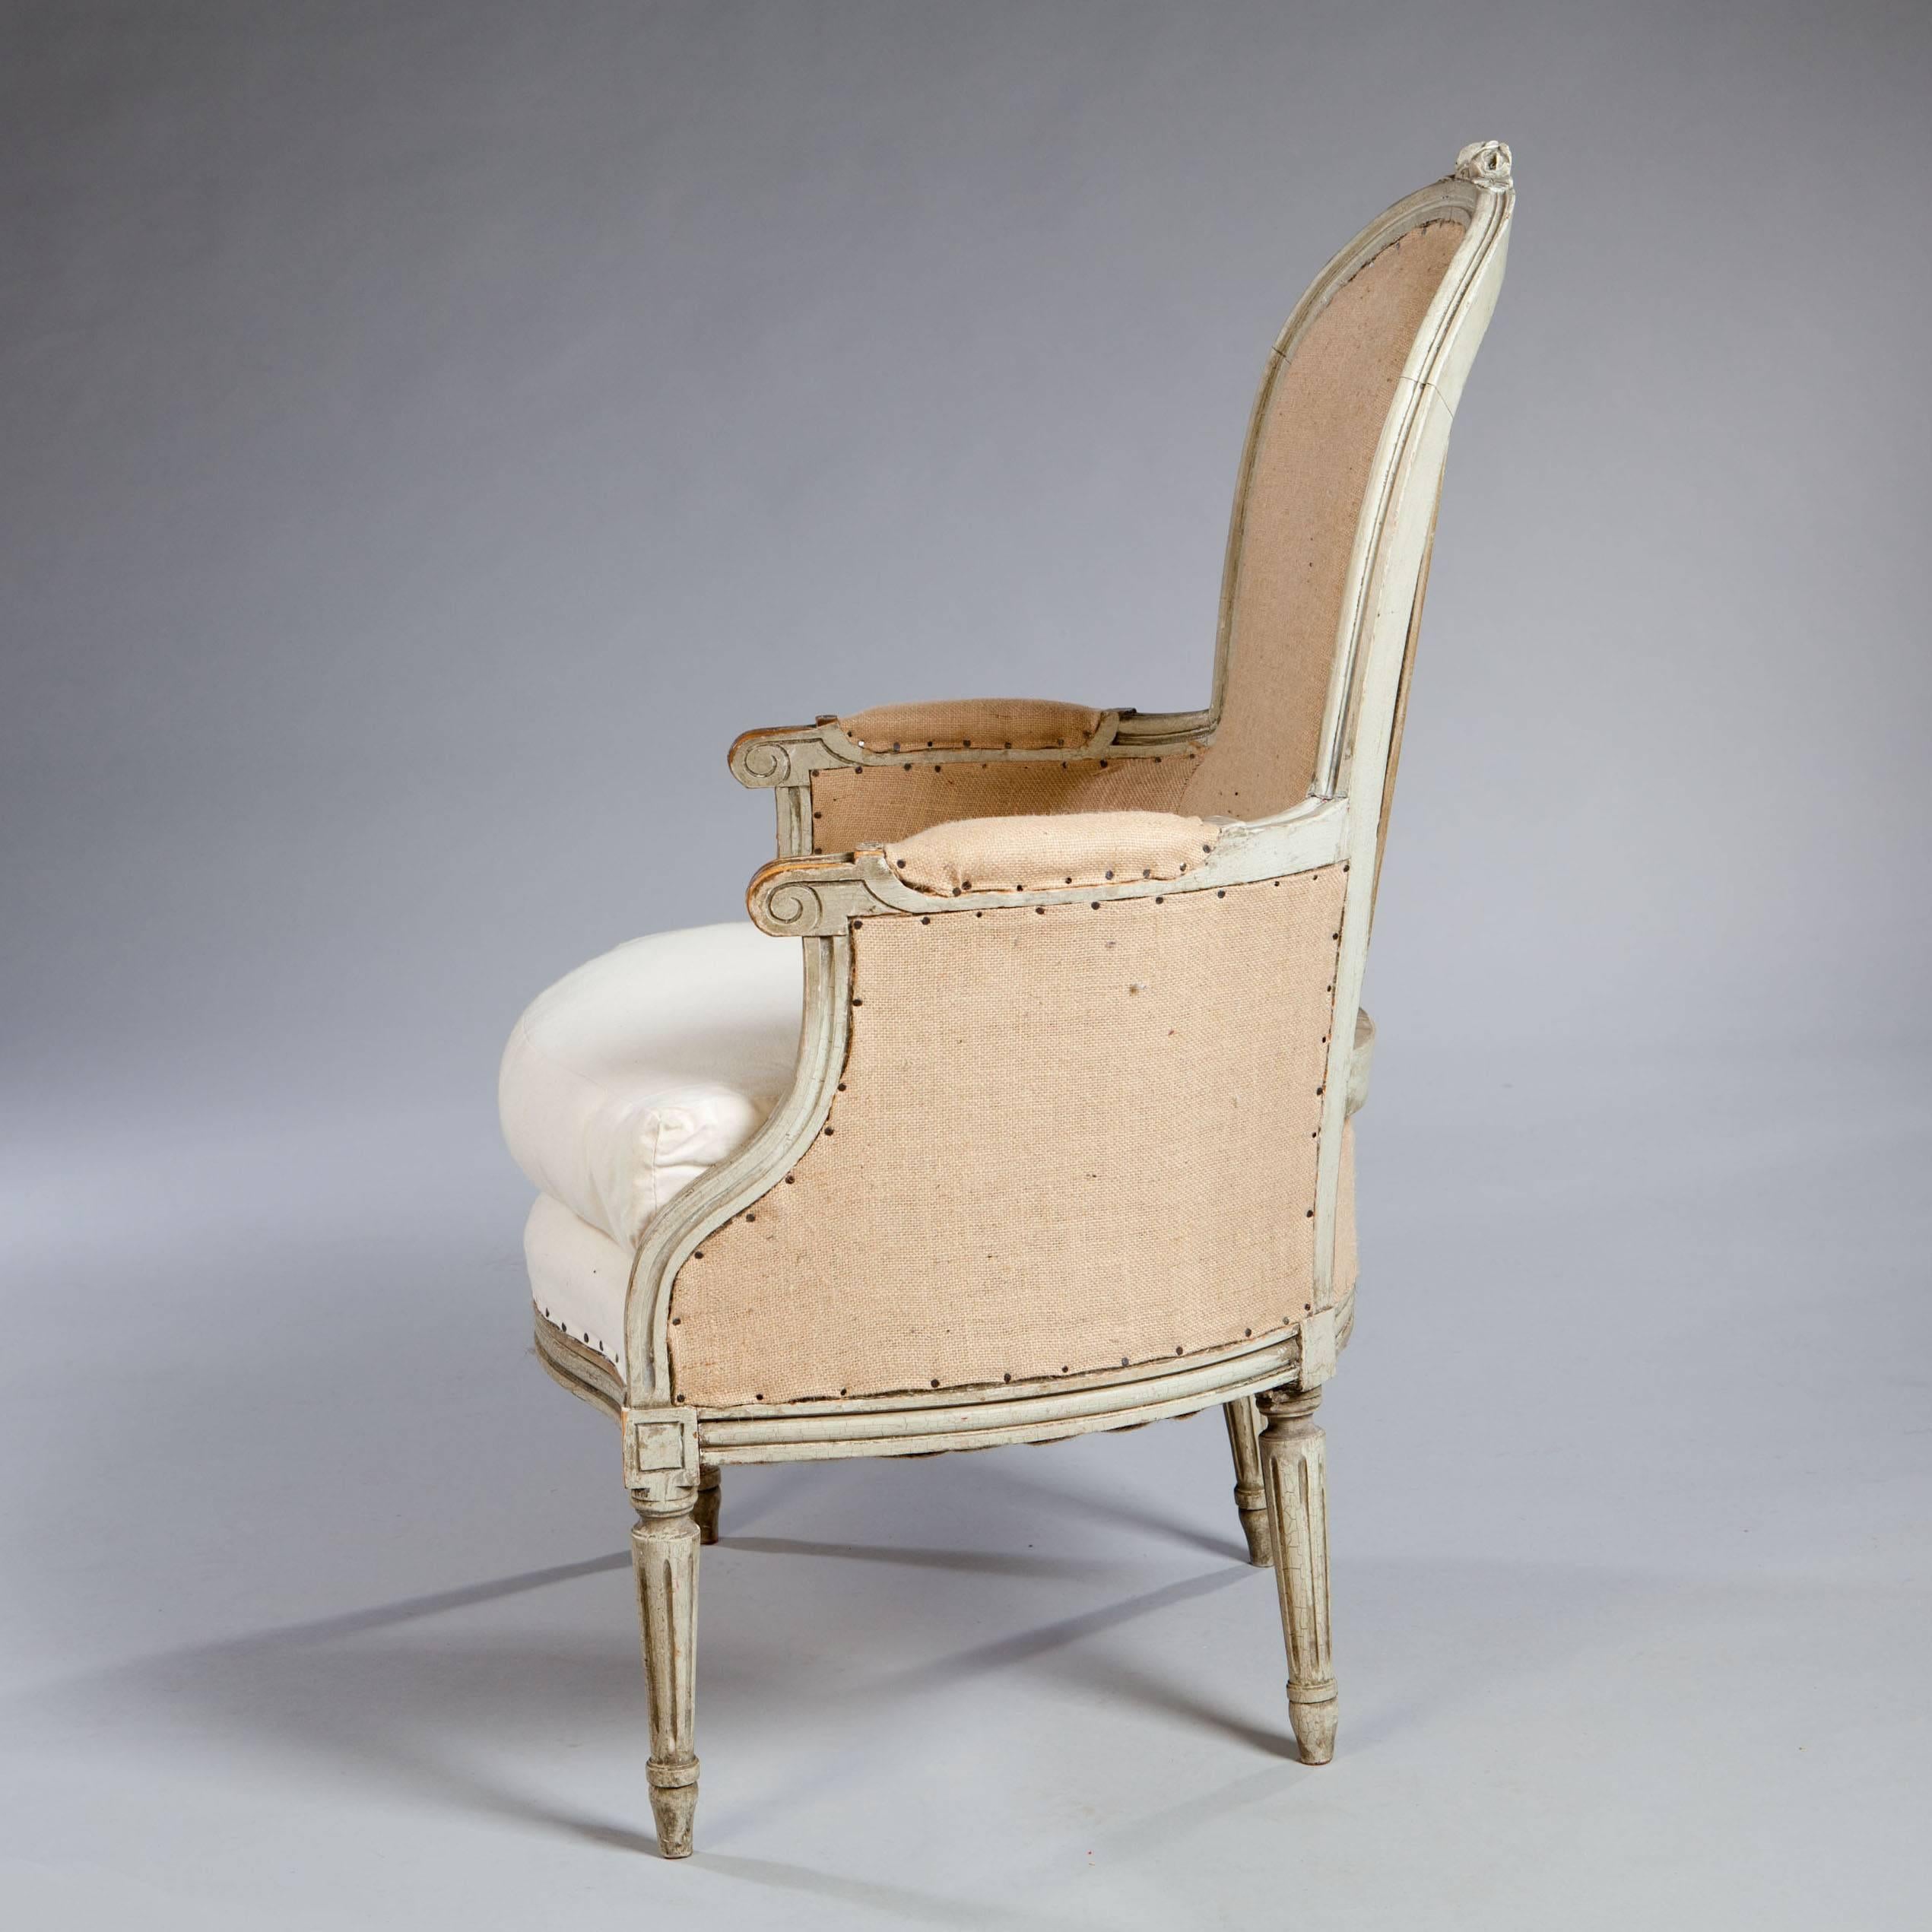 A charming pair of 19th century French antique neo classical bergere armchairs, the shaped backs offering generous support, raised on fluted tapering legs. Retaining the original paint finish.